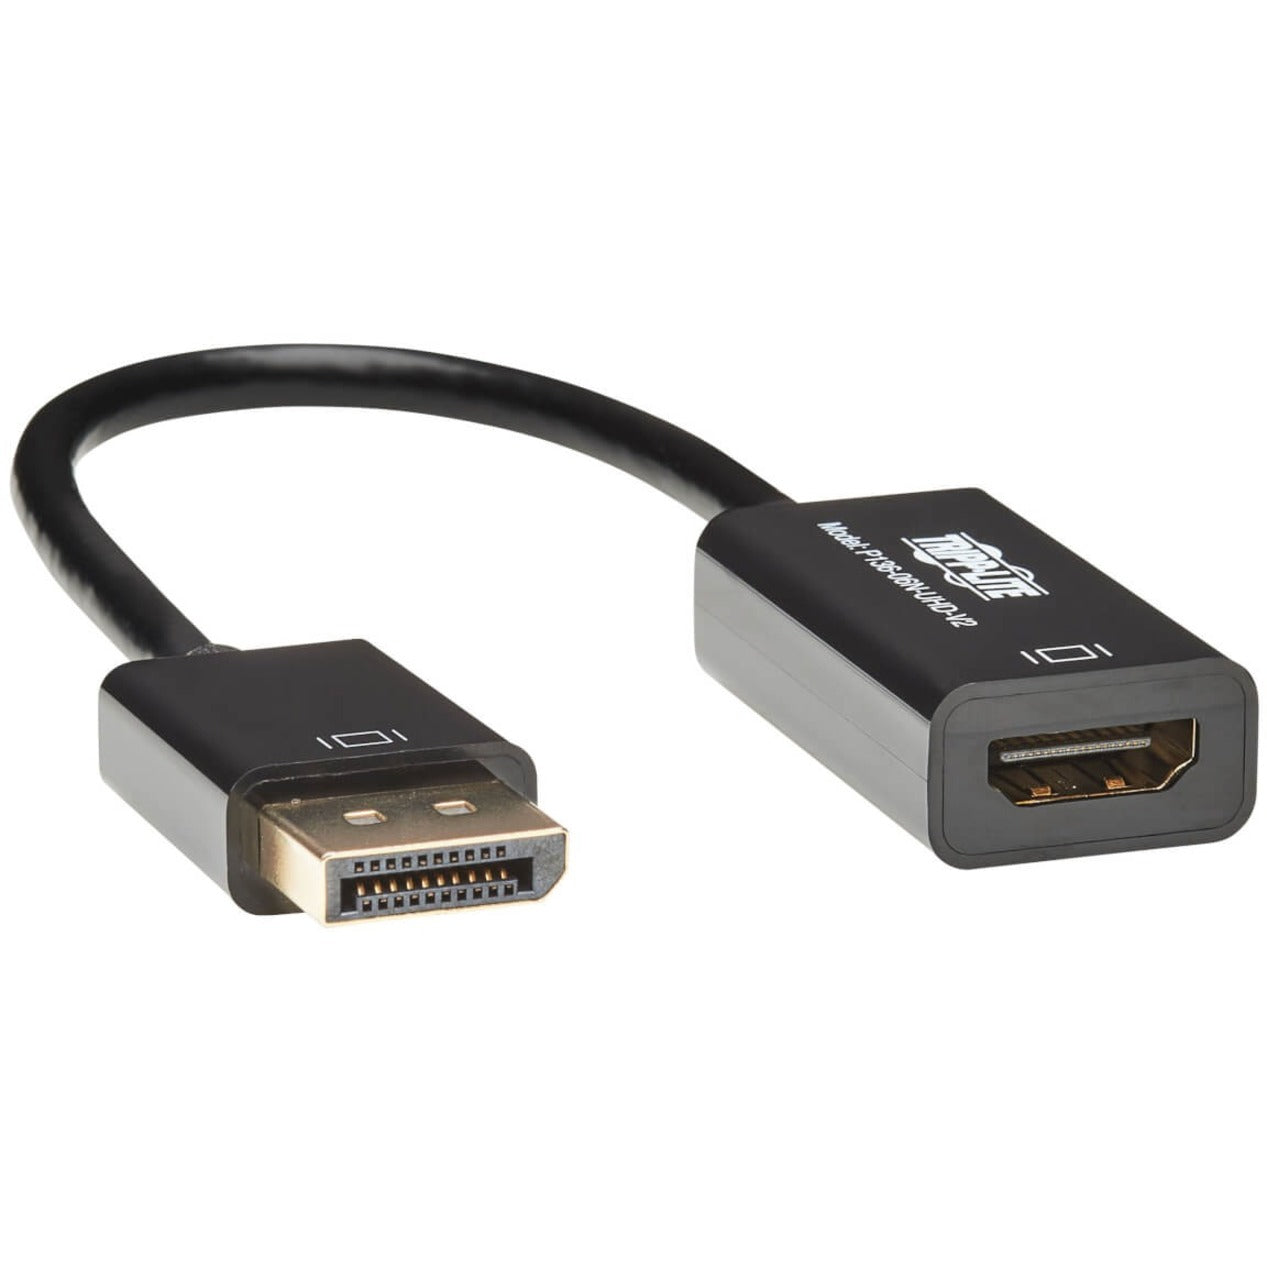 Tripp Lite P136-06N-UHD-V2 DisplayPort/HDMI Audio/Video Cable, Active, 6", 3840 x 2160, Gold Plated